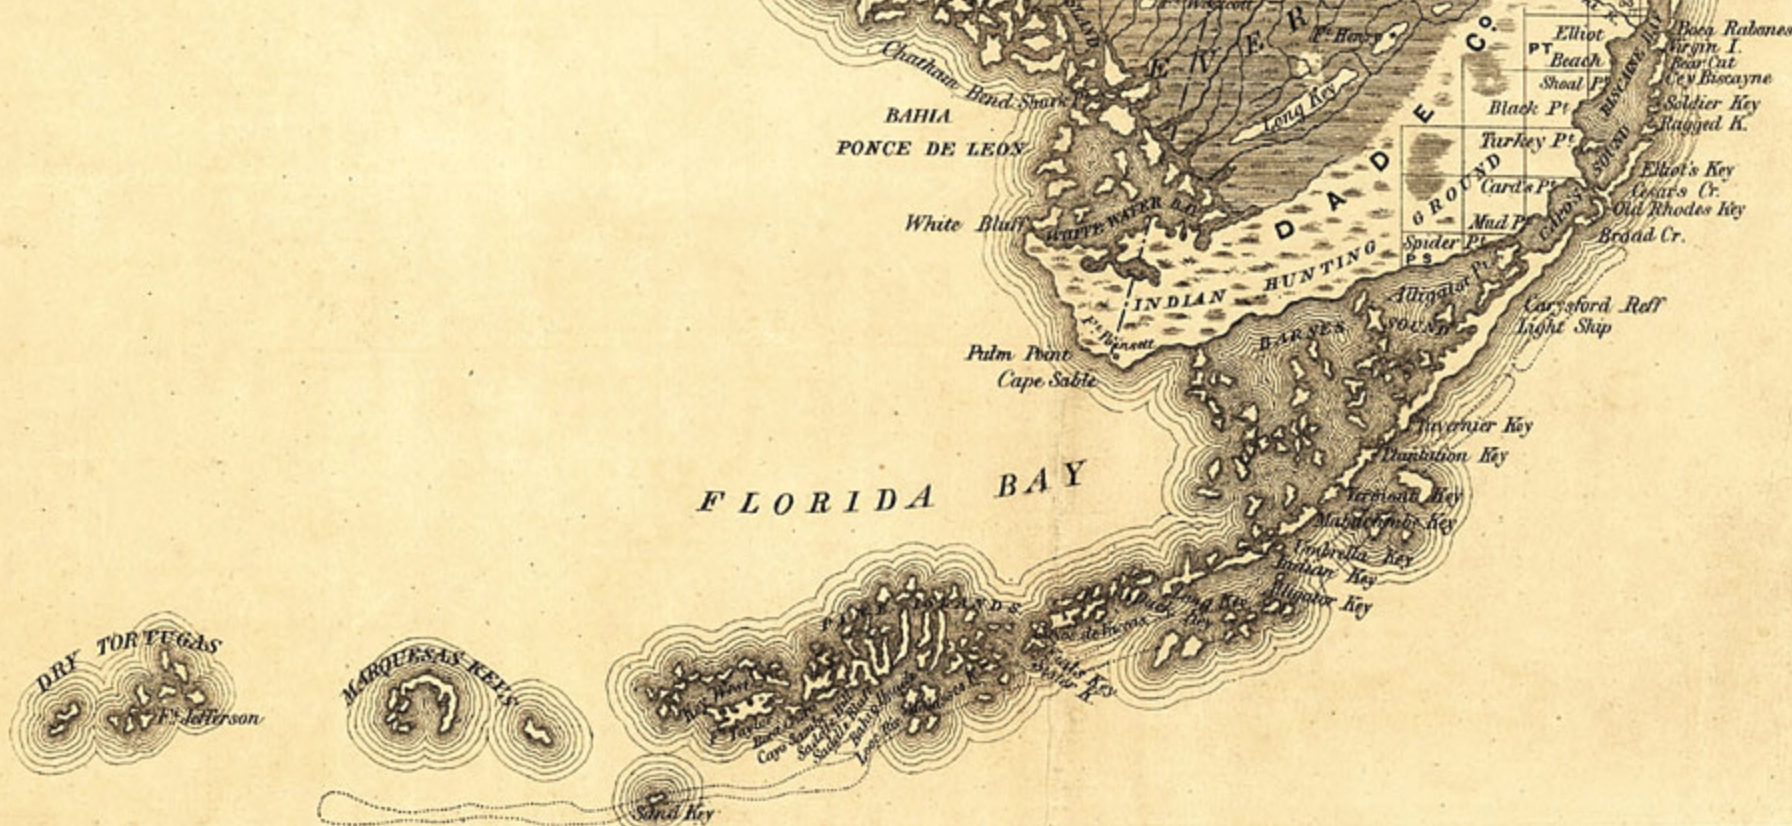 Historic map of the Florida Bay, keys, & Dry Tortugas